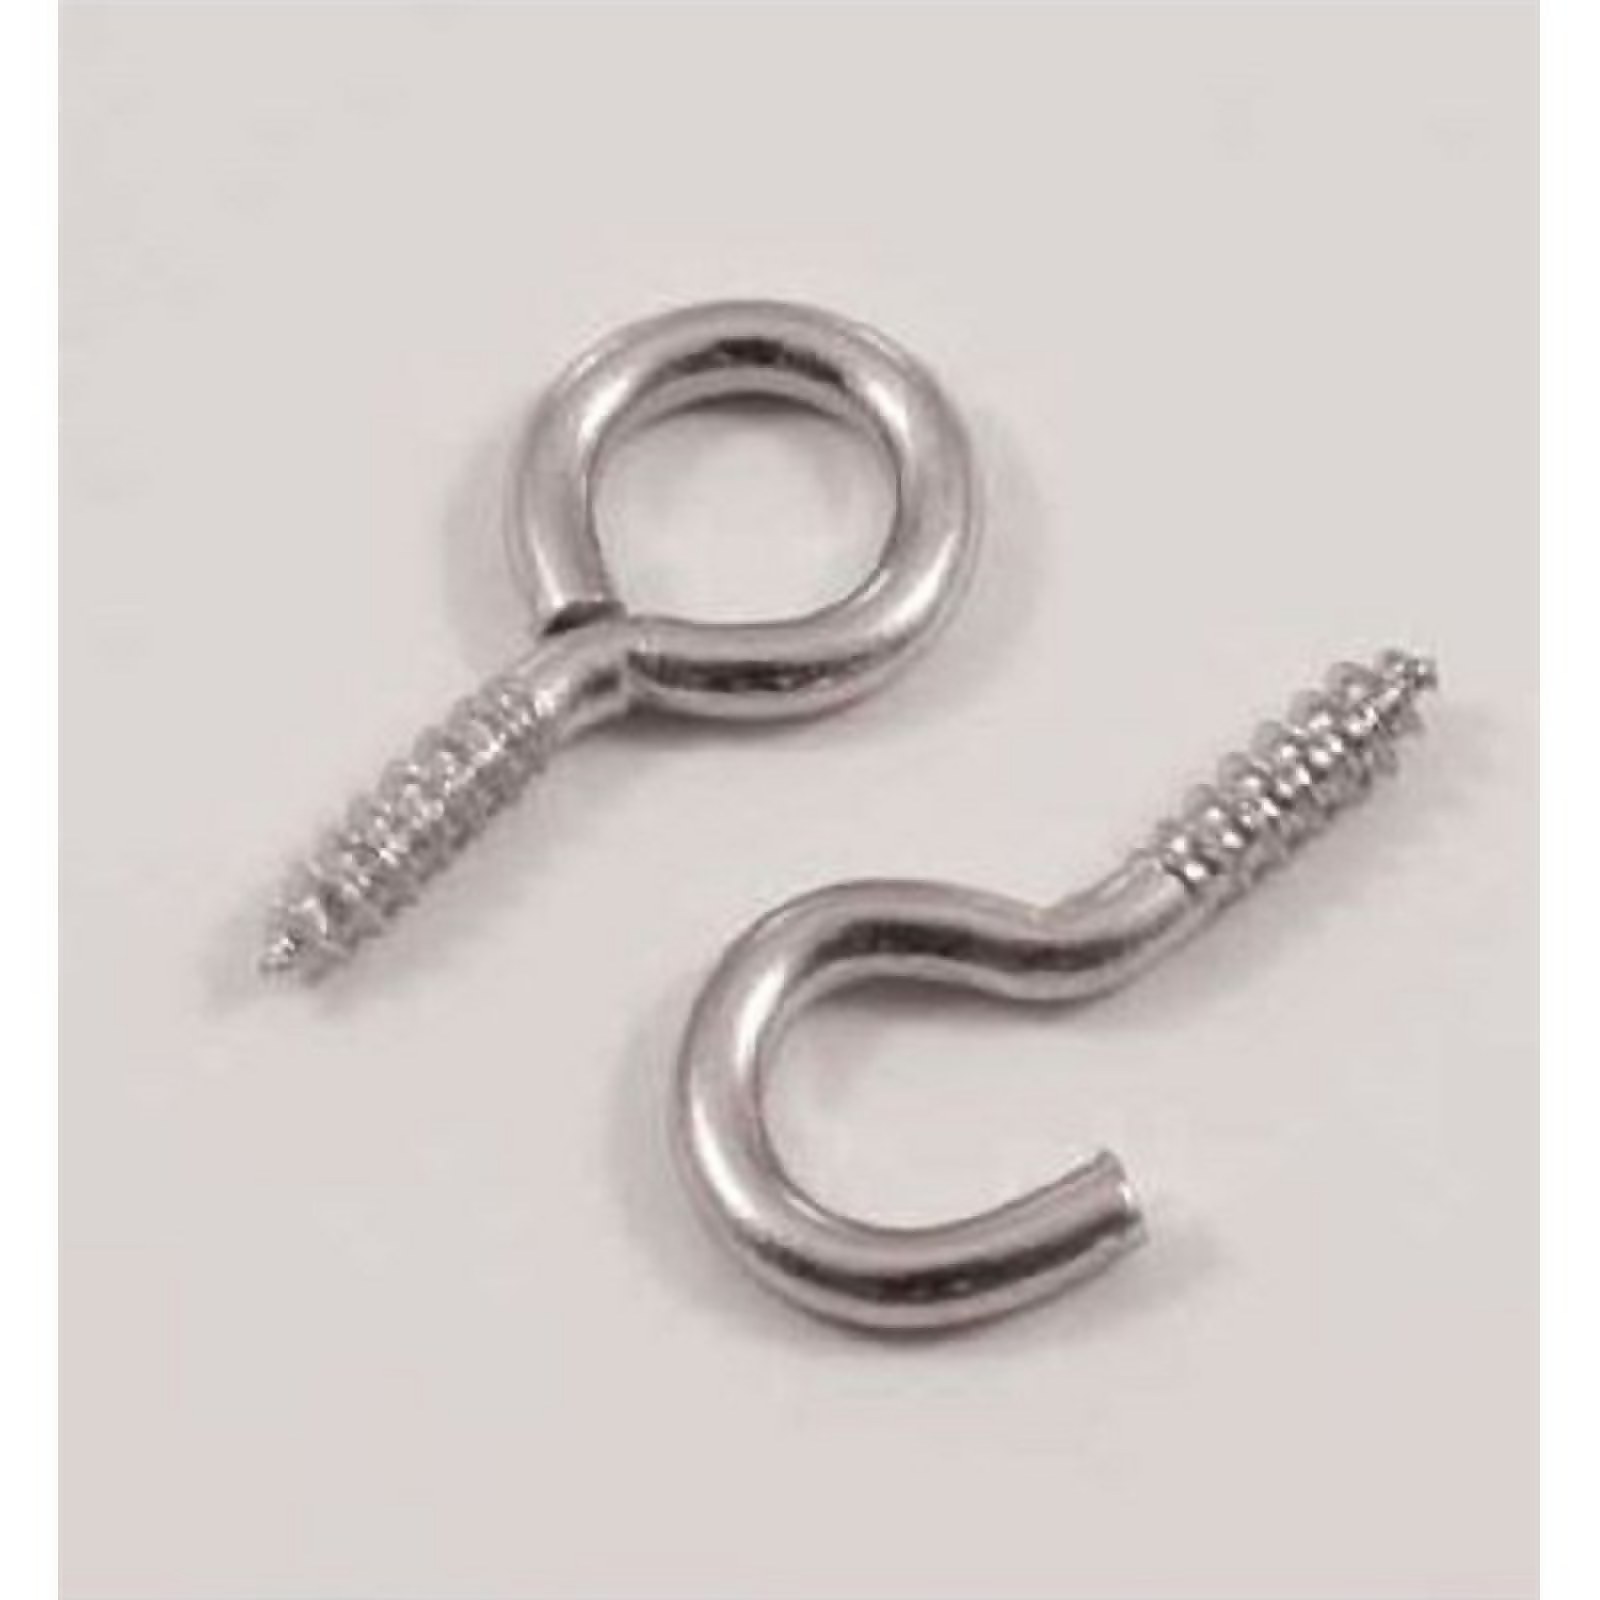 Photo of Screw Hooks And Eyes - Zinc Plated - 8 Pairs